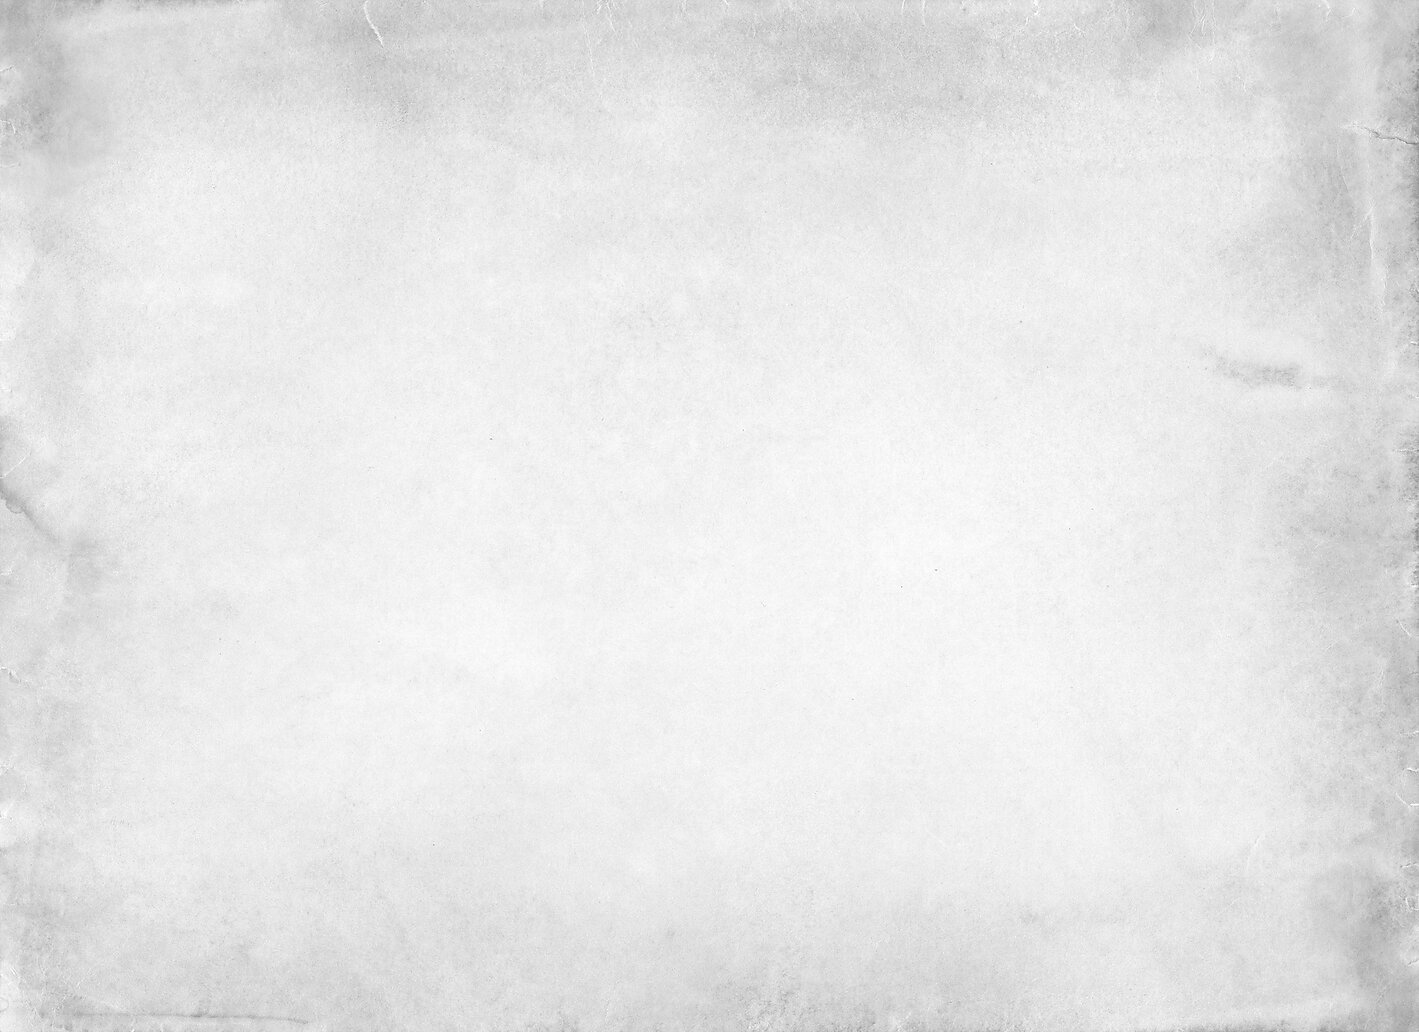 Stock image of an old, blank piece of paper.